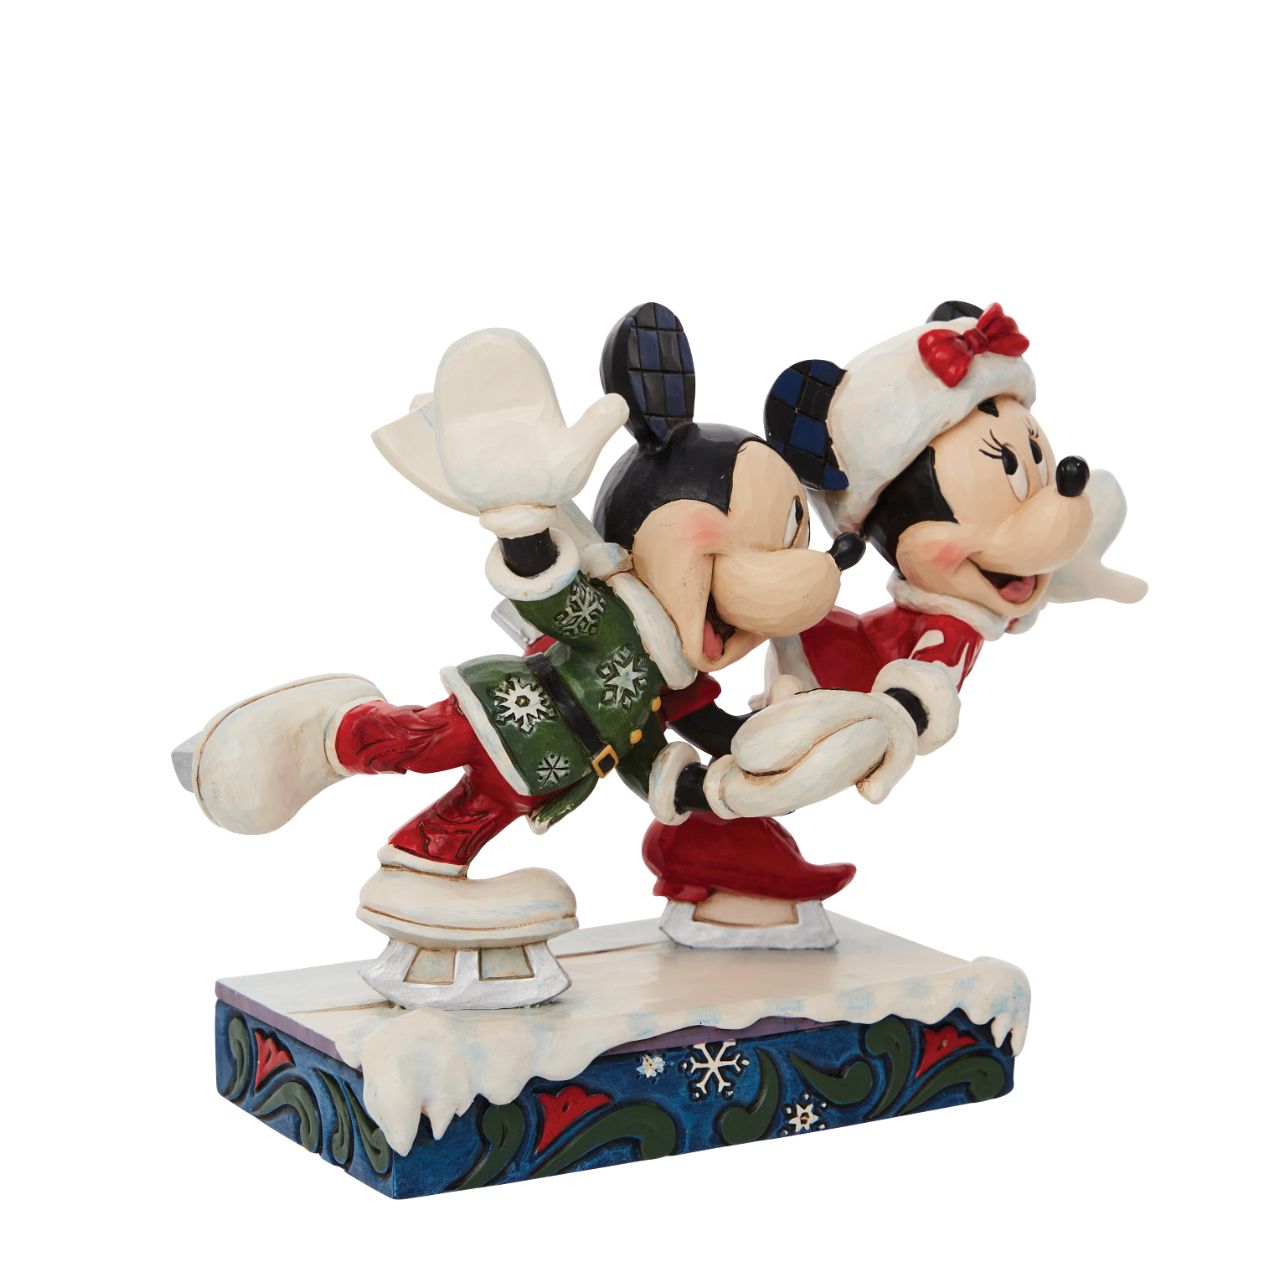 Jim Shore Mickey and Minnie Ice Skating Figurine  Skating together, Mickey and Minnie Mouse warm the winter with their timeless love story. Hand in hand the pair enjoy each other's company in stunning snowflake tunics in this Jim Shore creation.